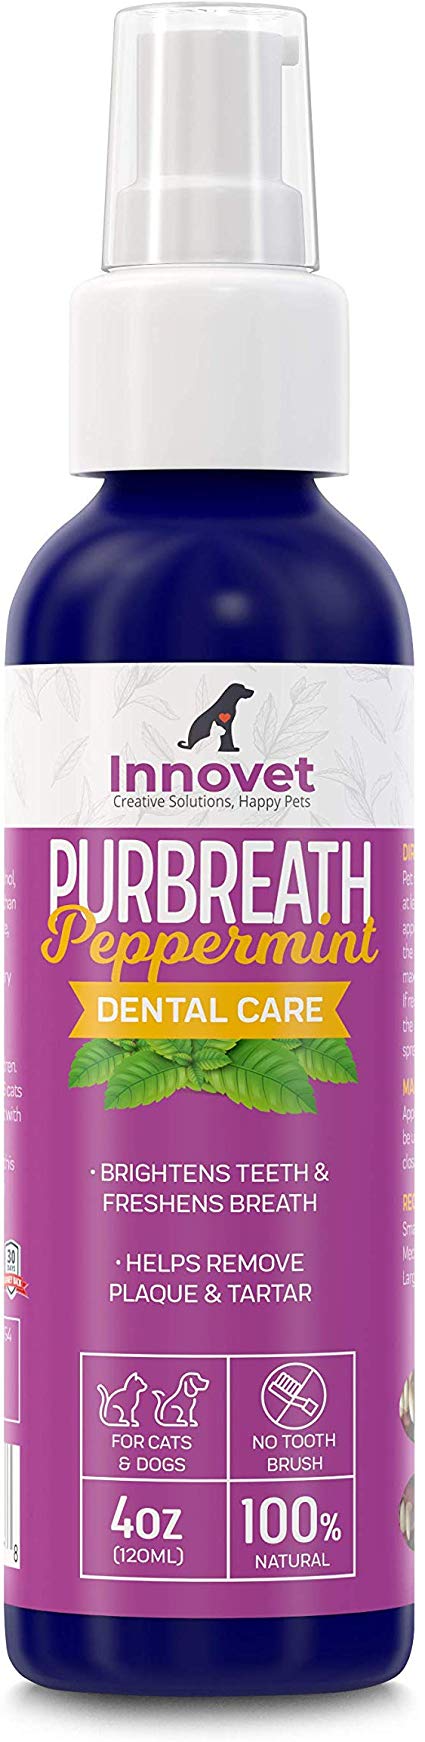 INNOVETPET PurBreath Oral Care Gel for Dog & Cats – 120 ML No Toothbrush Dental Care for Bad Pet Breath. Fights Tartar, Plaque, Gum Disease.100% Natural Ingredients | Made in USA